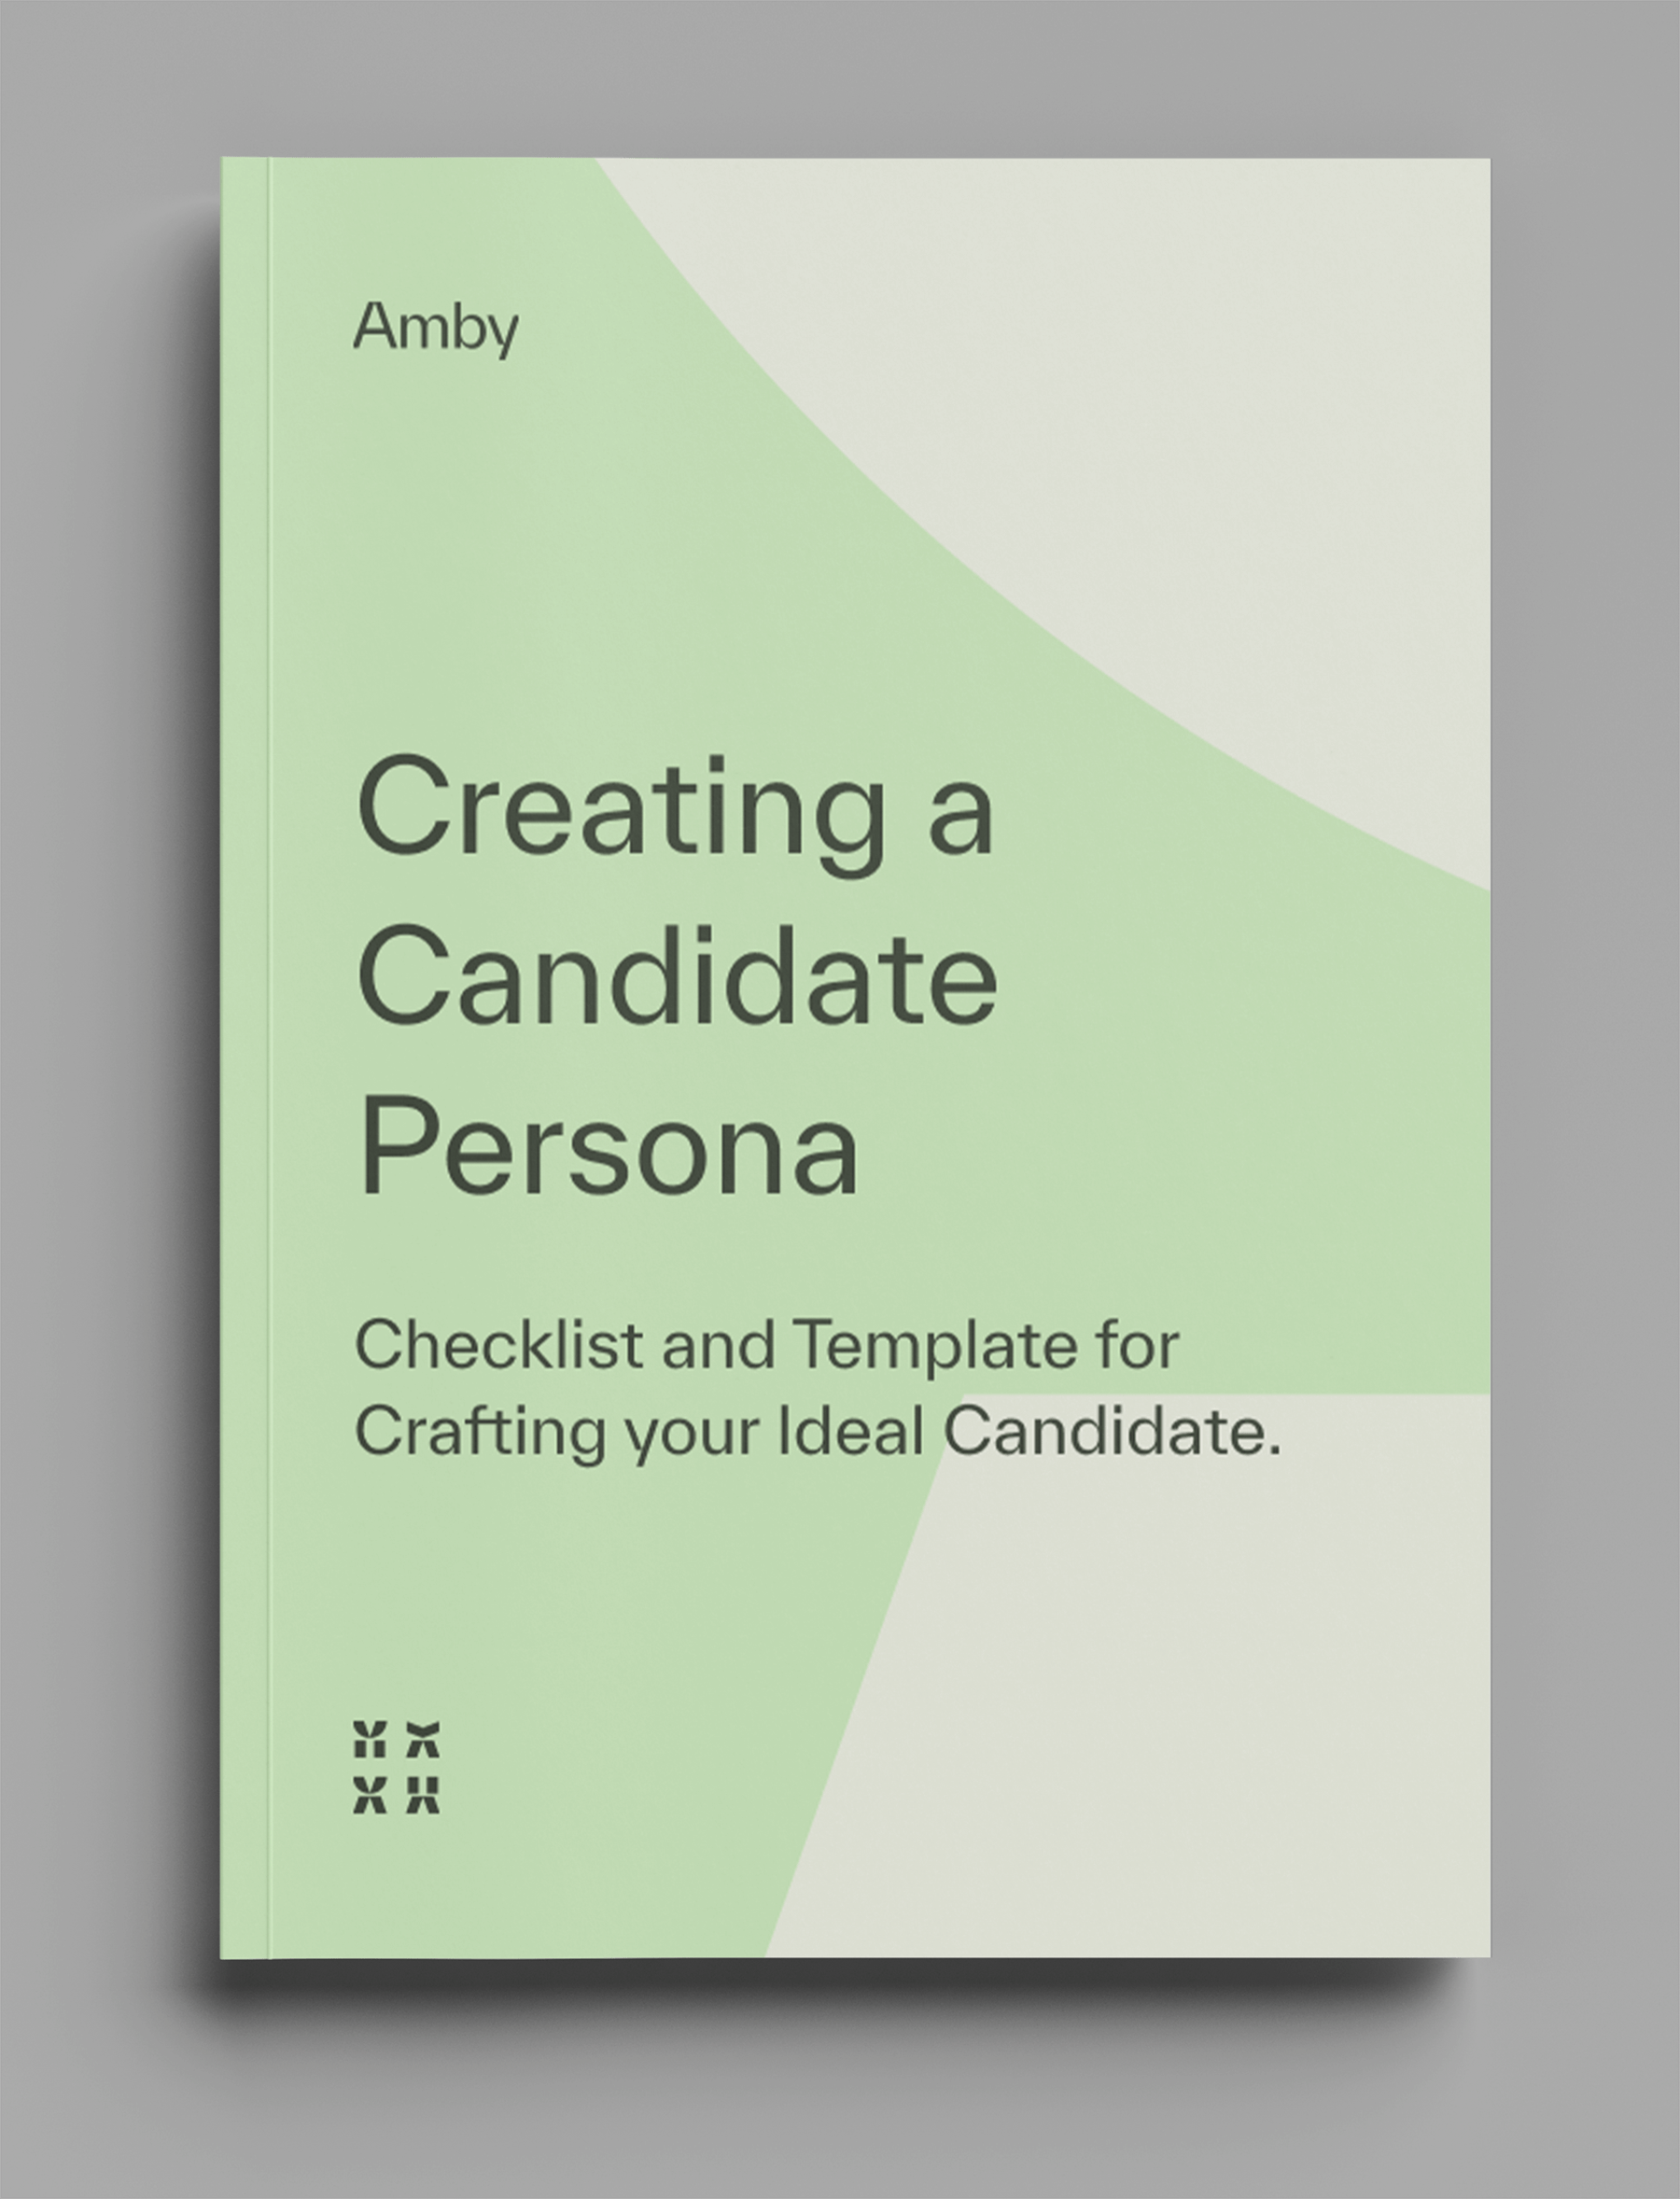 Creating a candidate persona